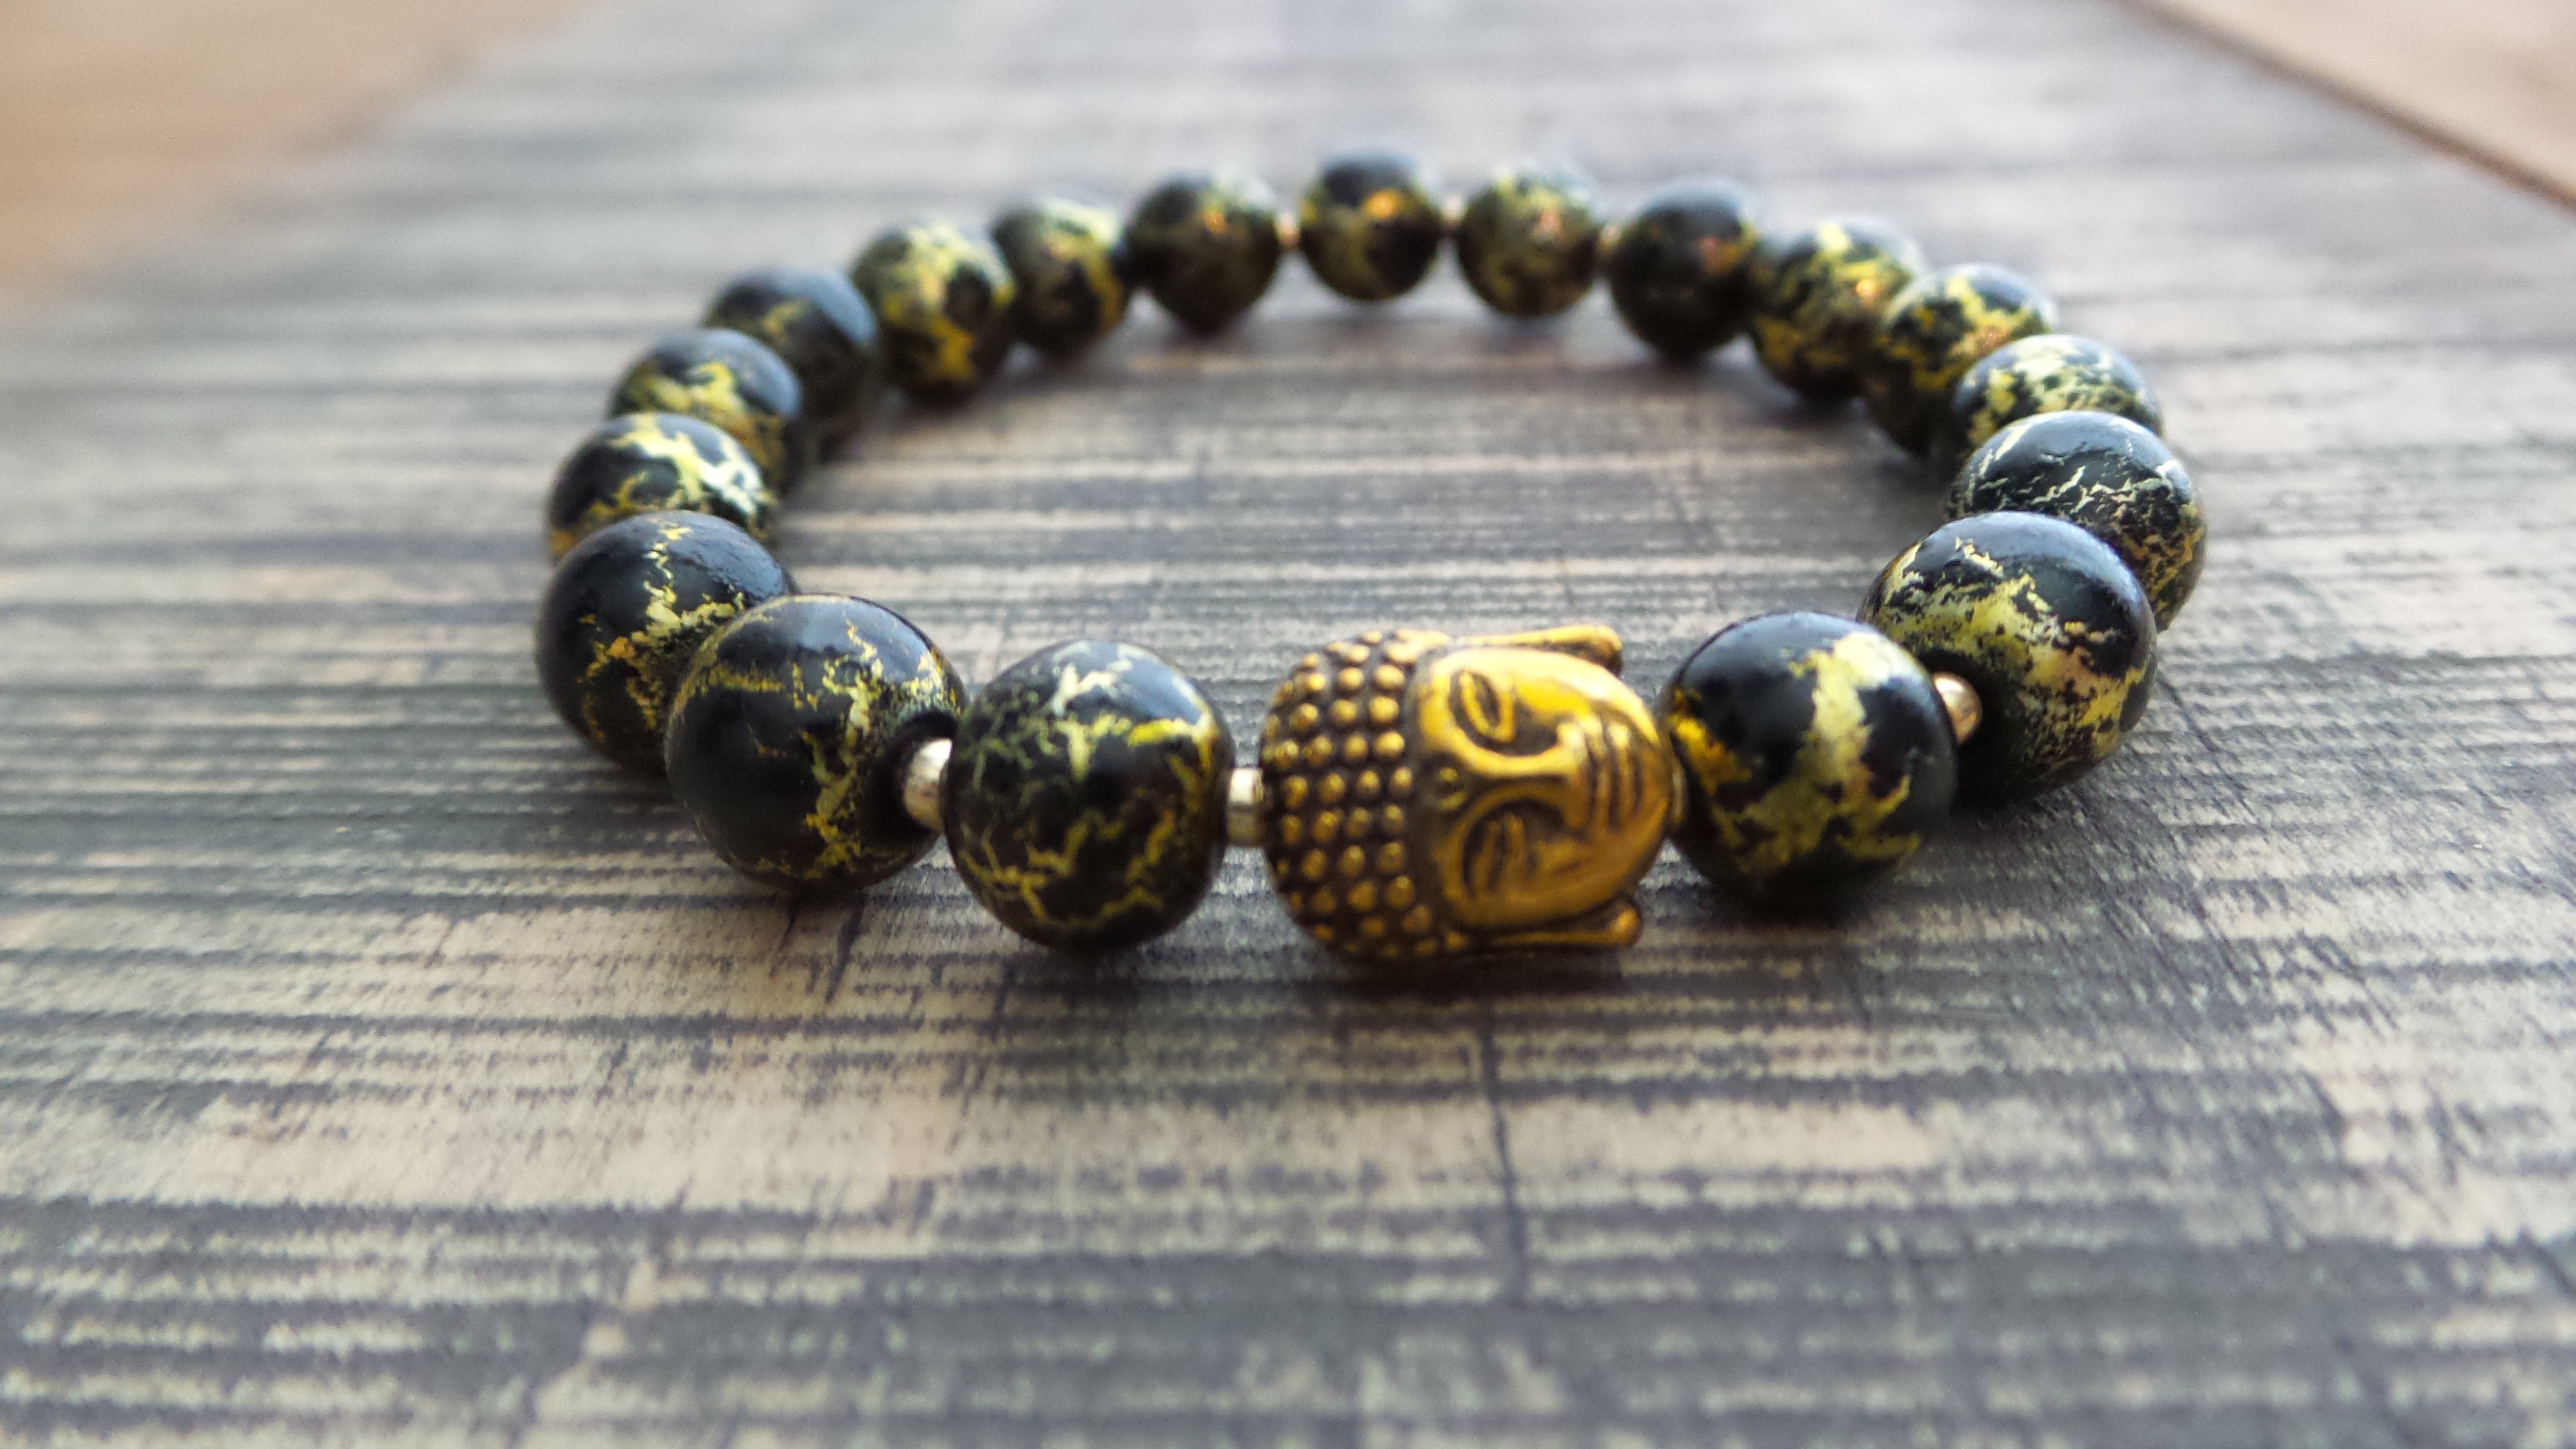 Bracelet- Black and Gold Vein Glass with Gold Buddha